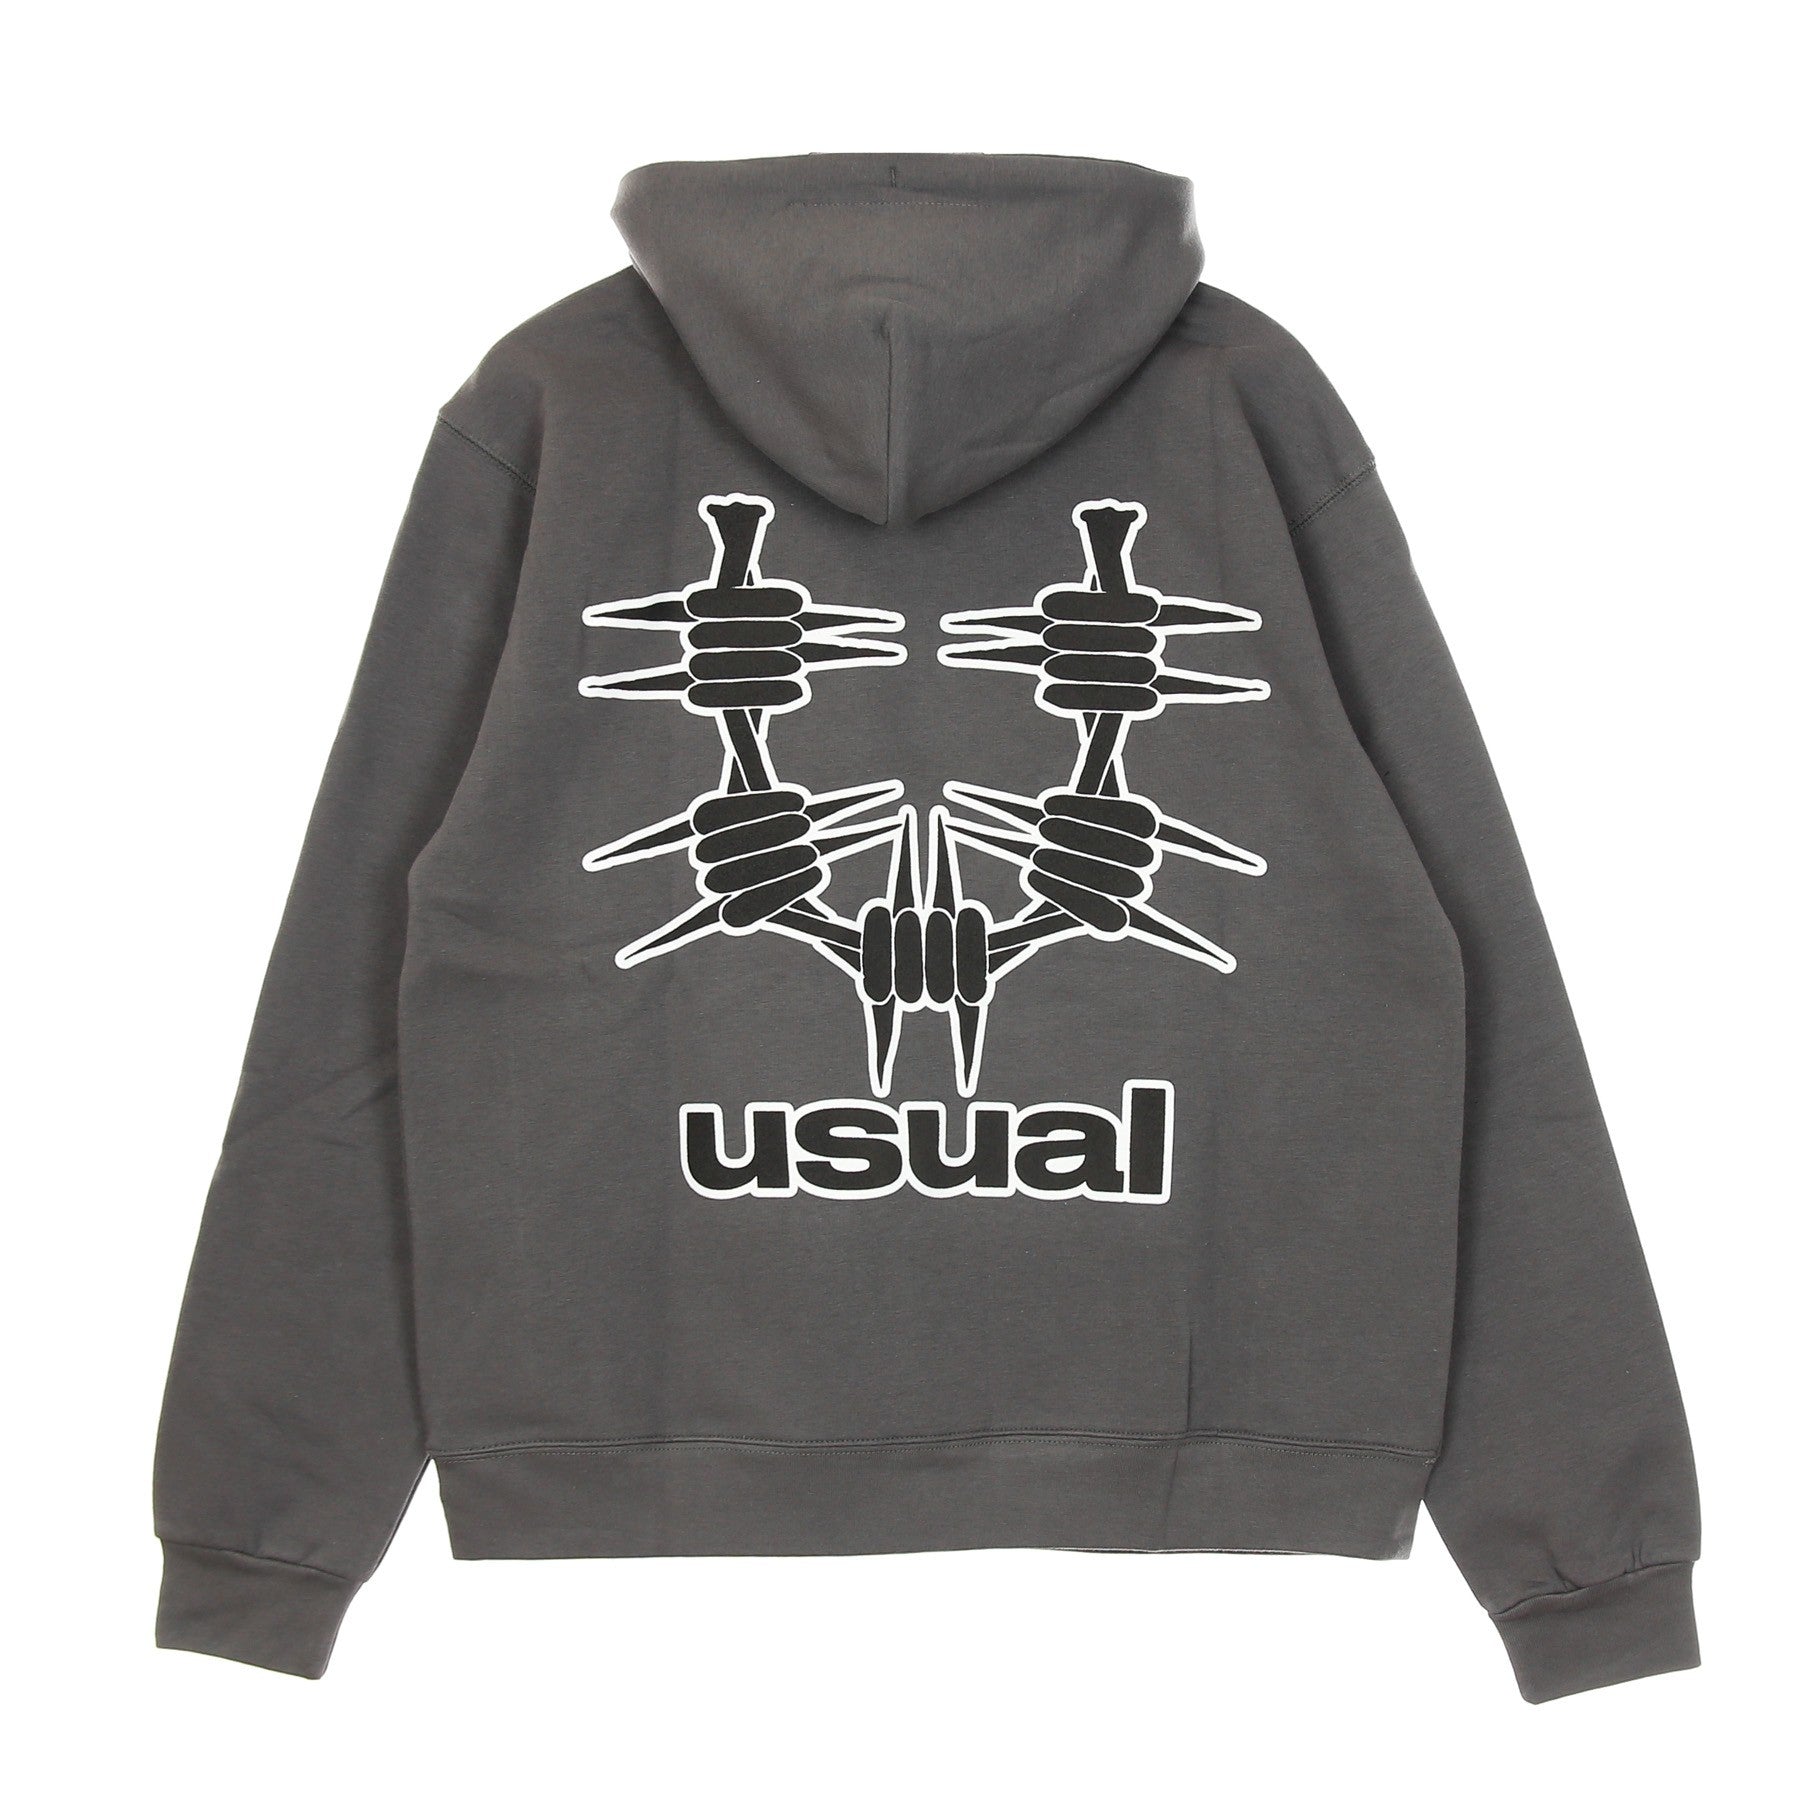 Usual Outline Men's Hoodie Anthracite